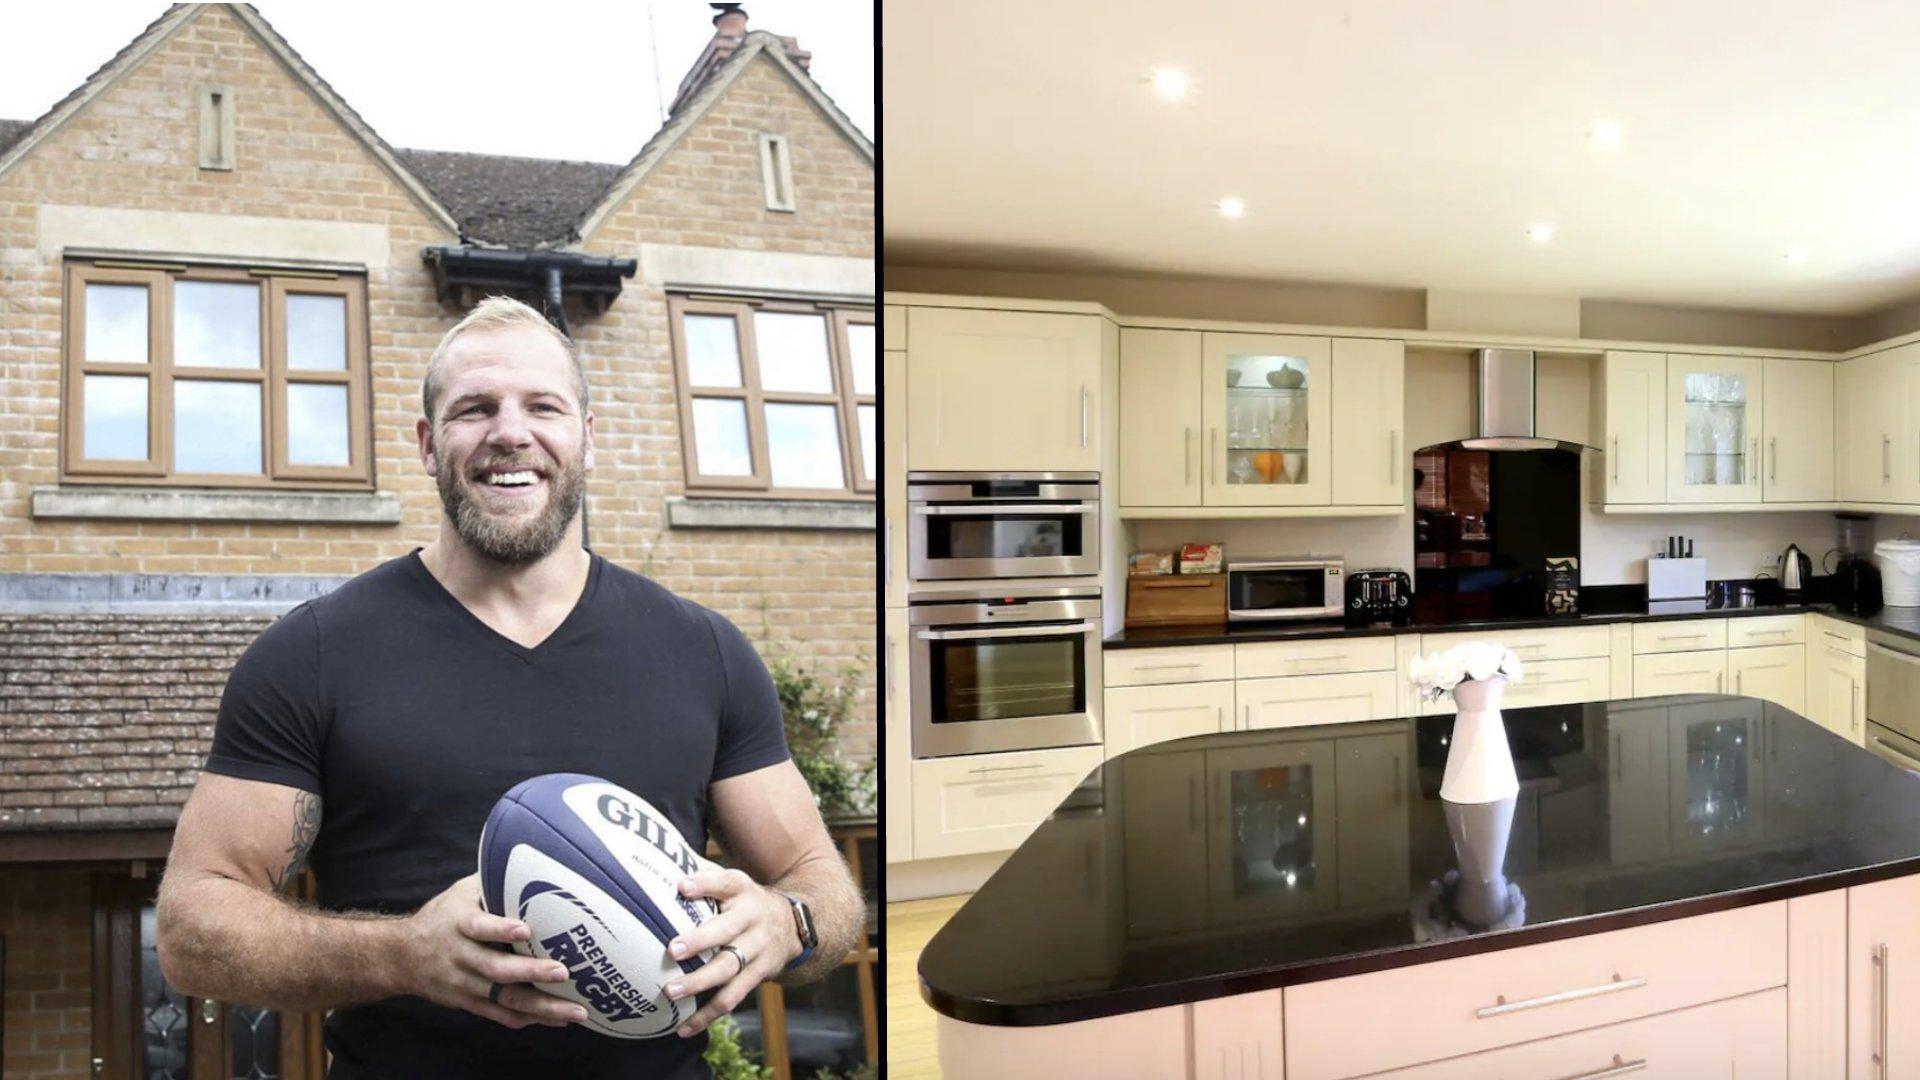 James Haskell is renting his house on Airbnb during